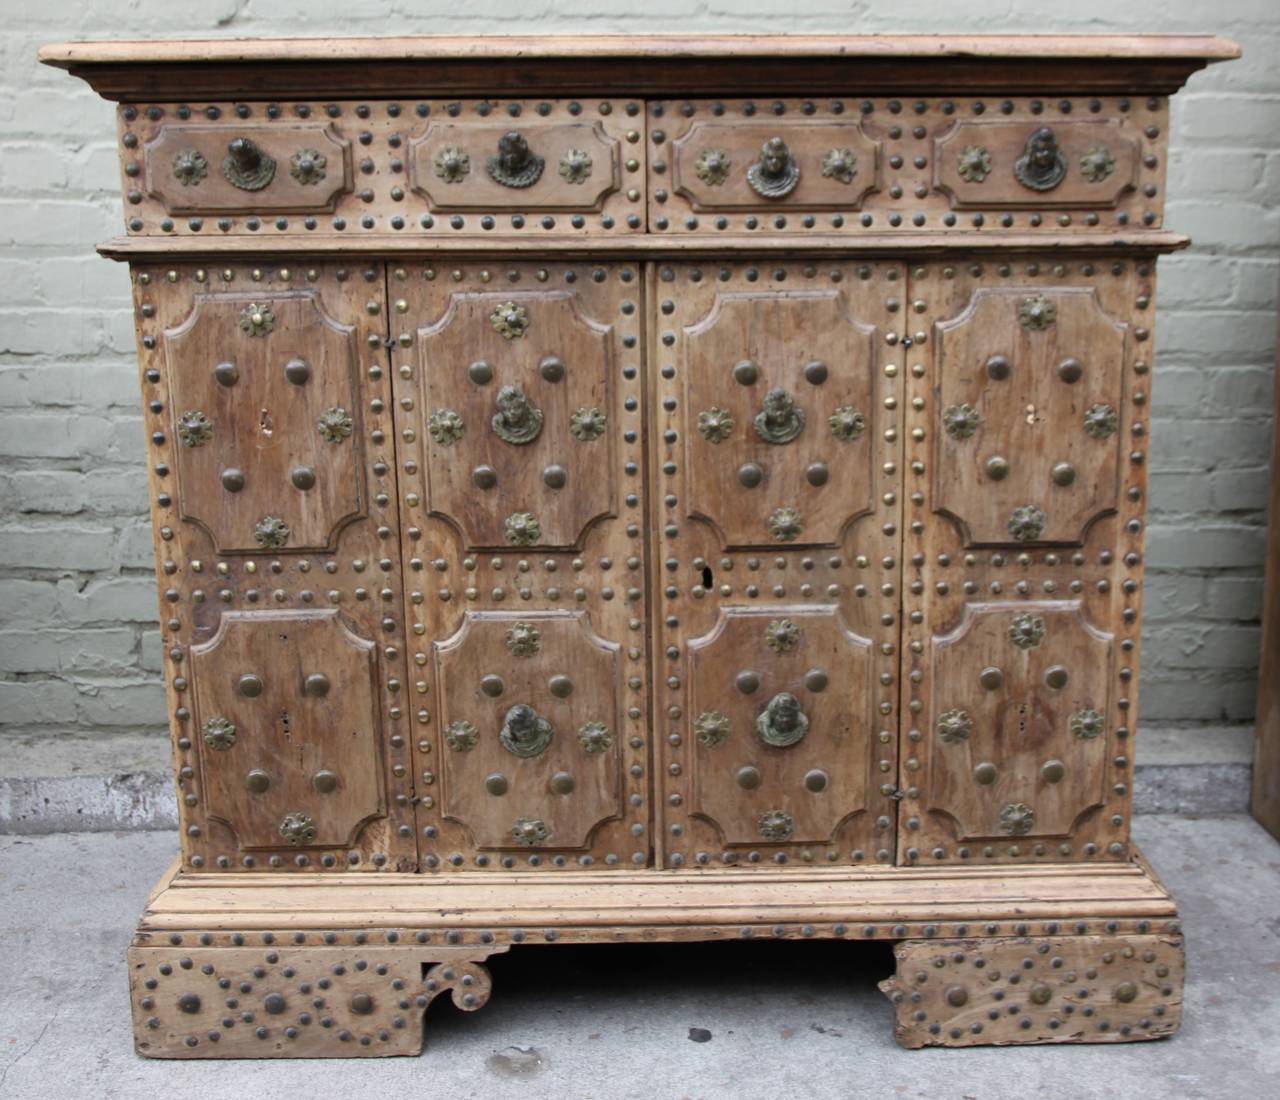 18th century Spanish studded buffet with bronze figural hardware. The cabinet has two drawers and two doors with ample storage.